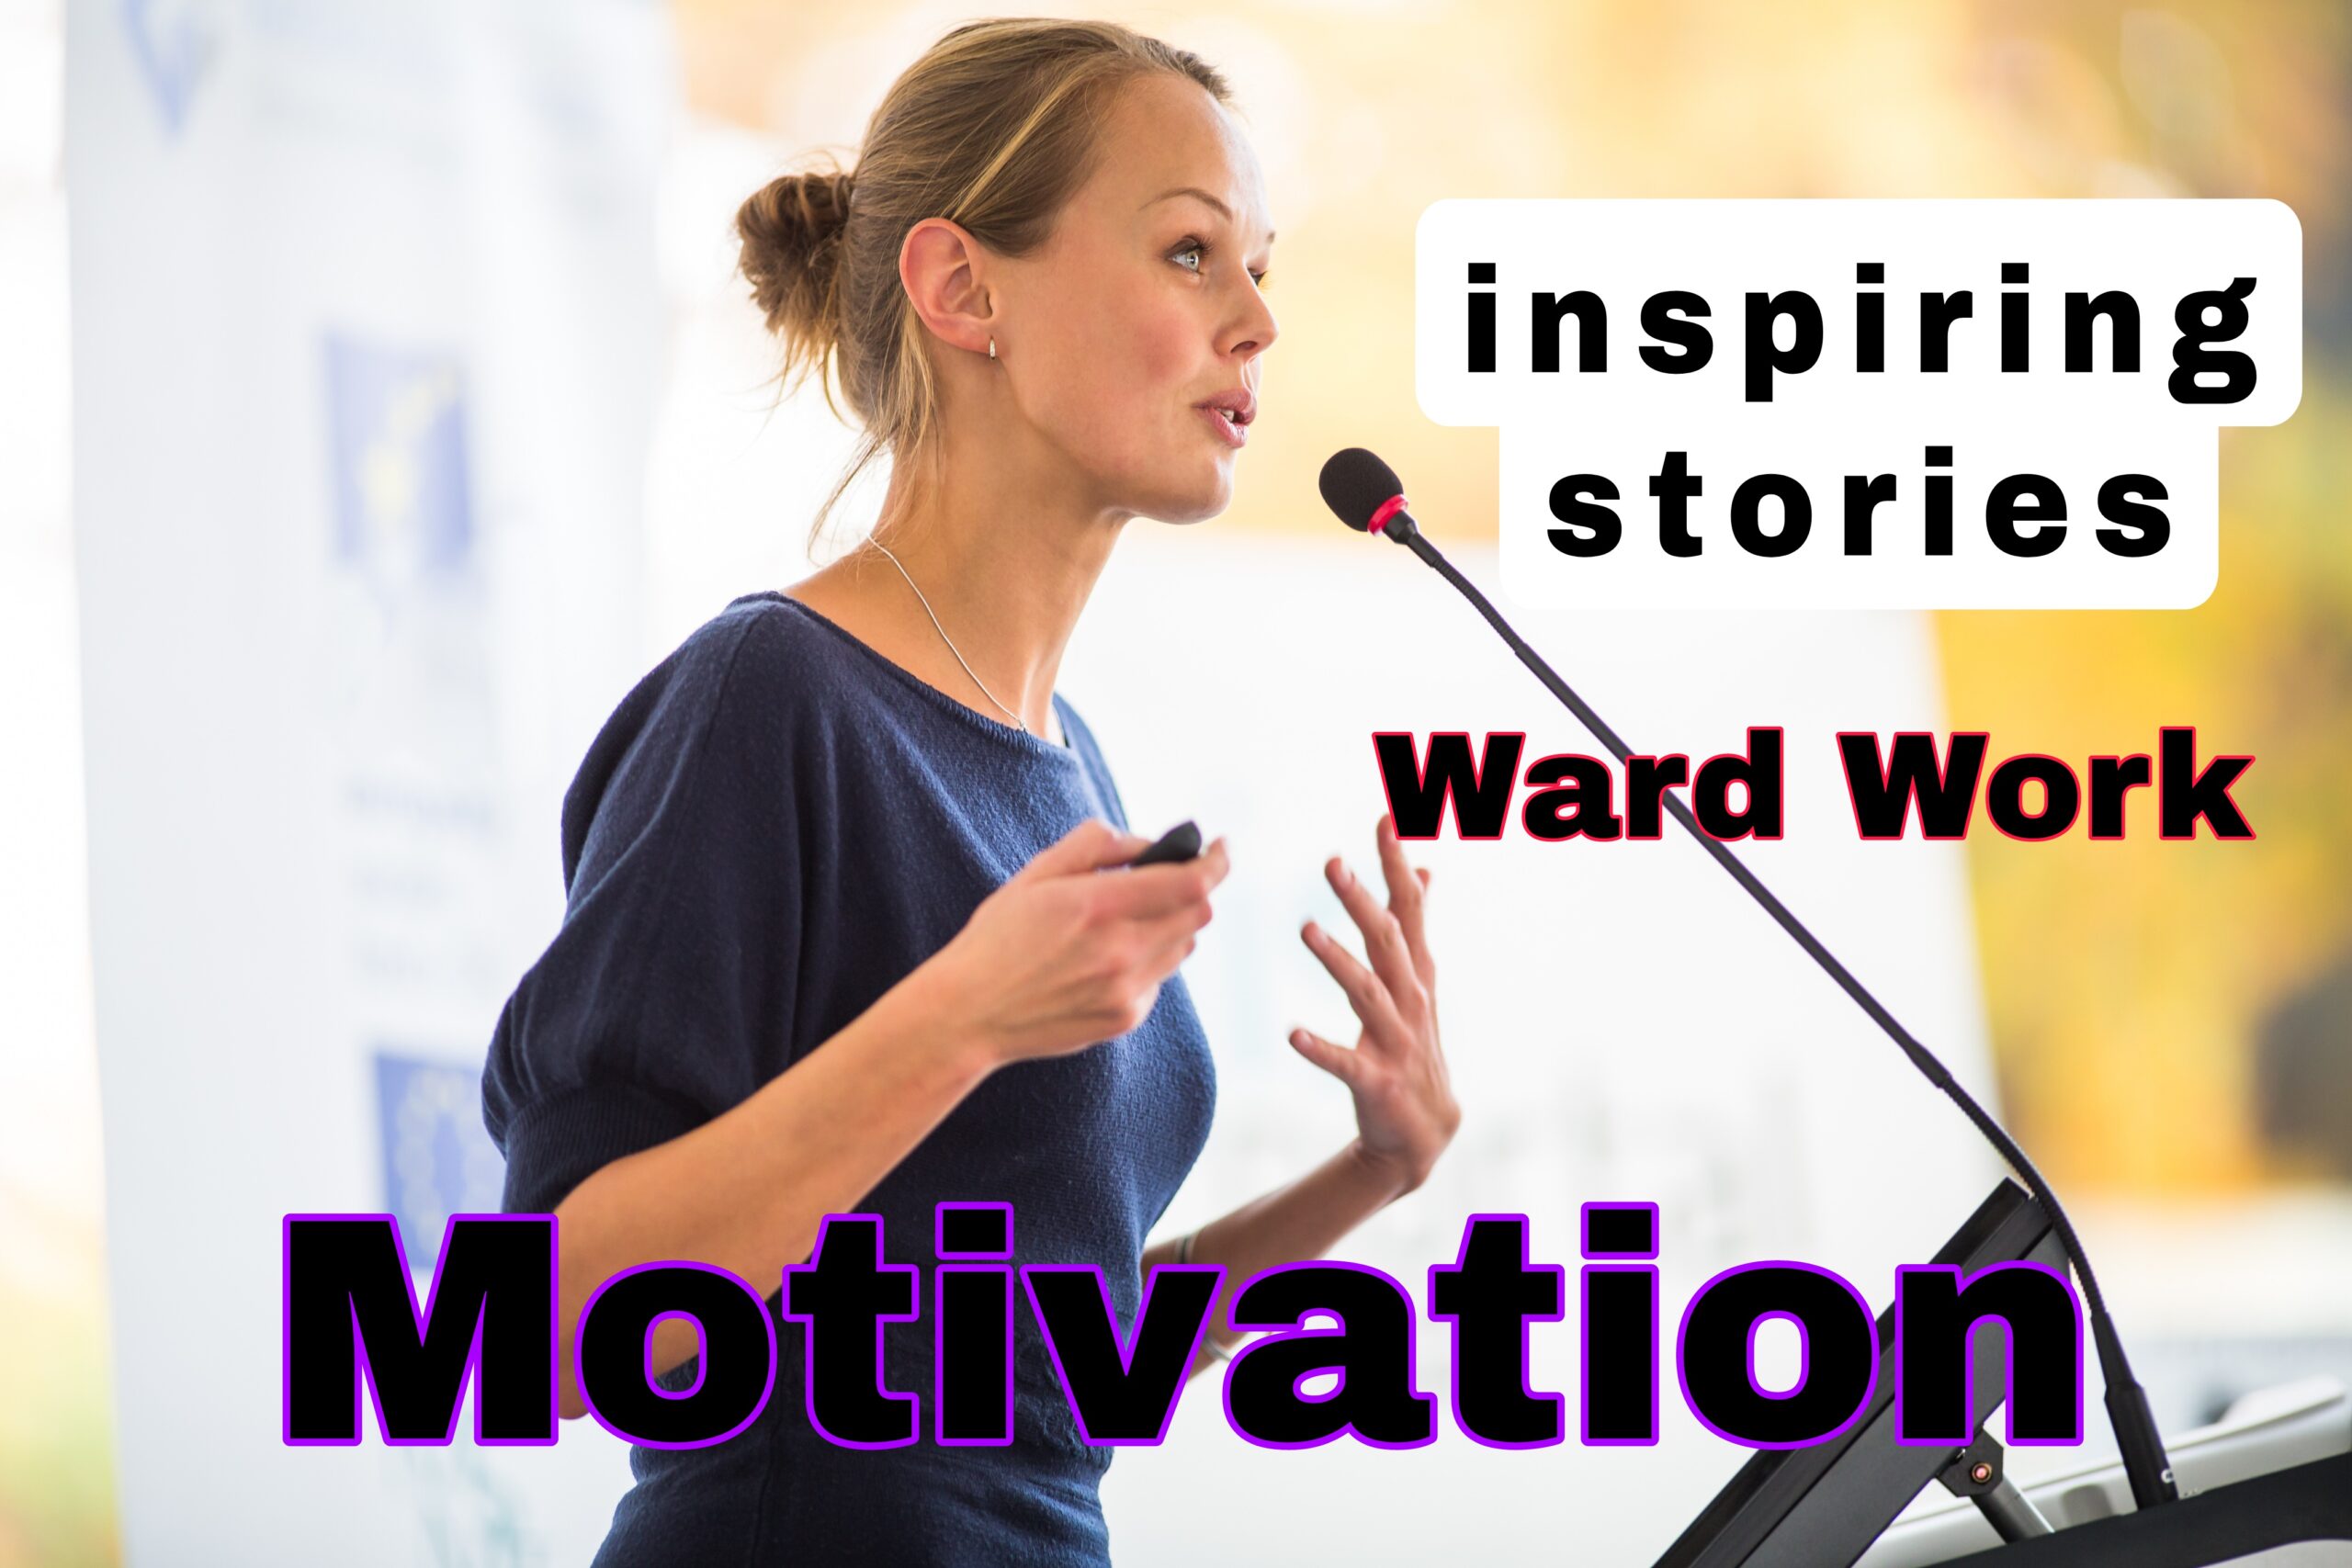 Inspired stories about heard work